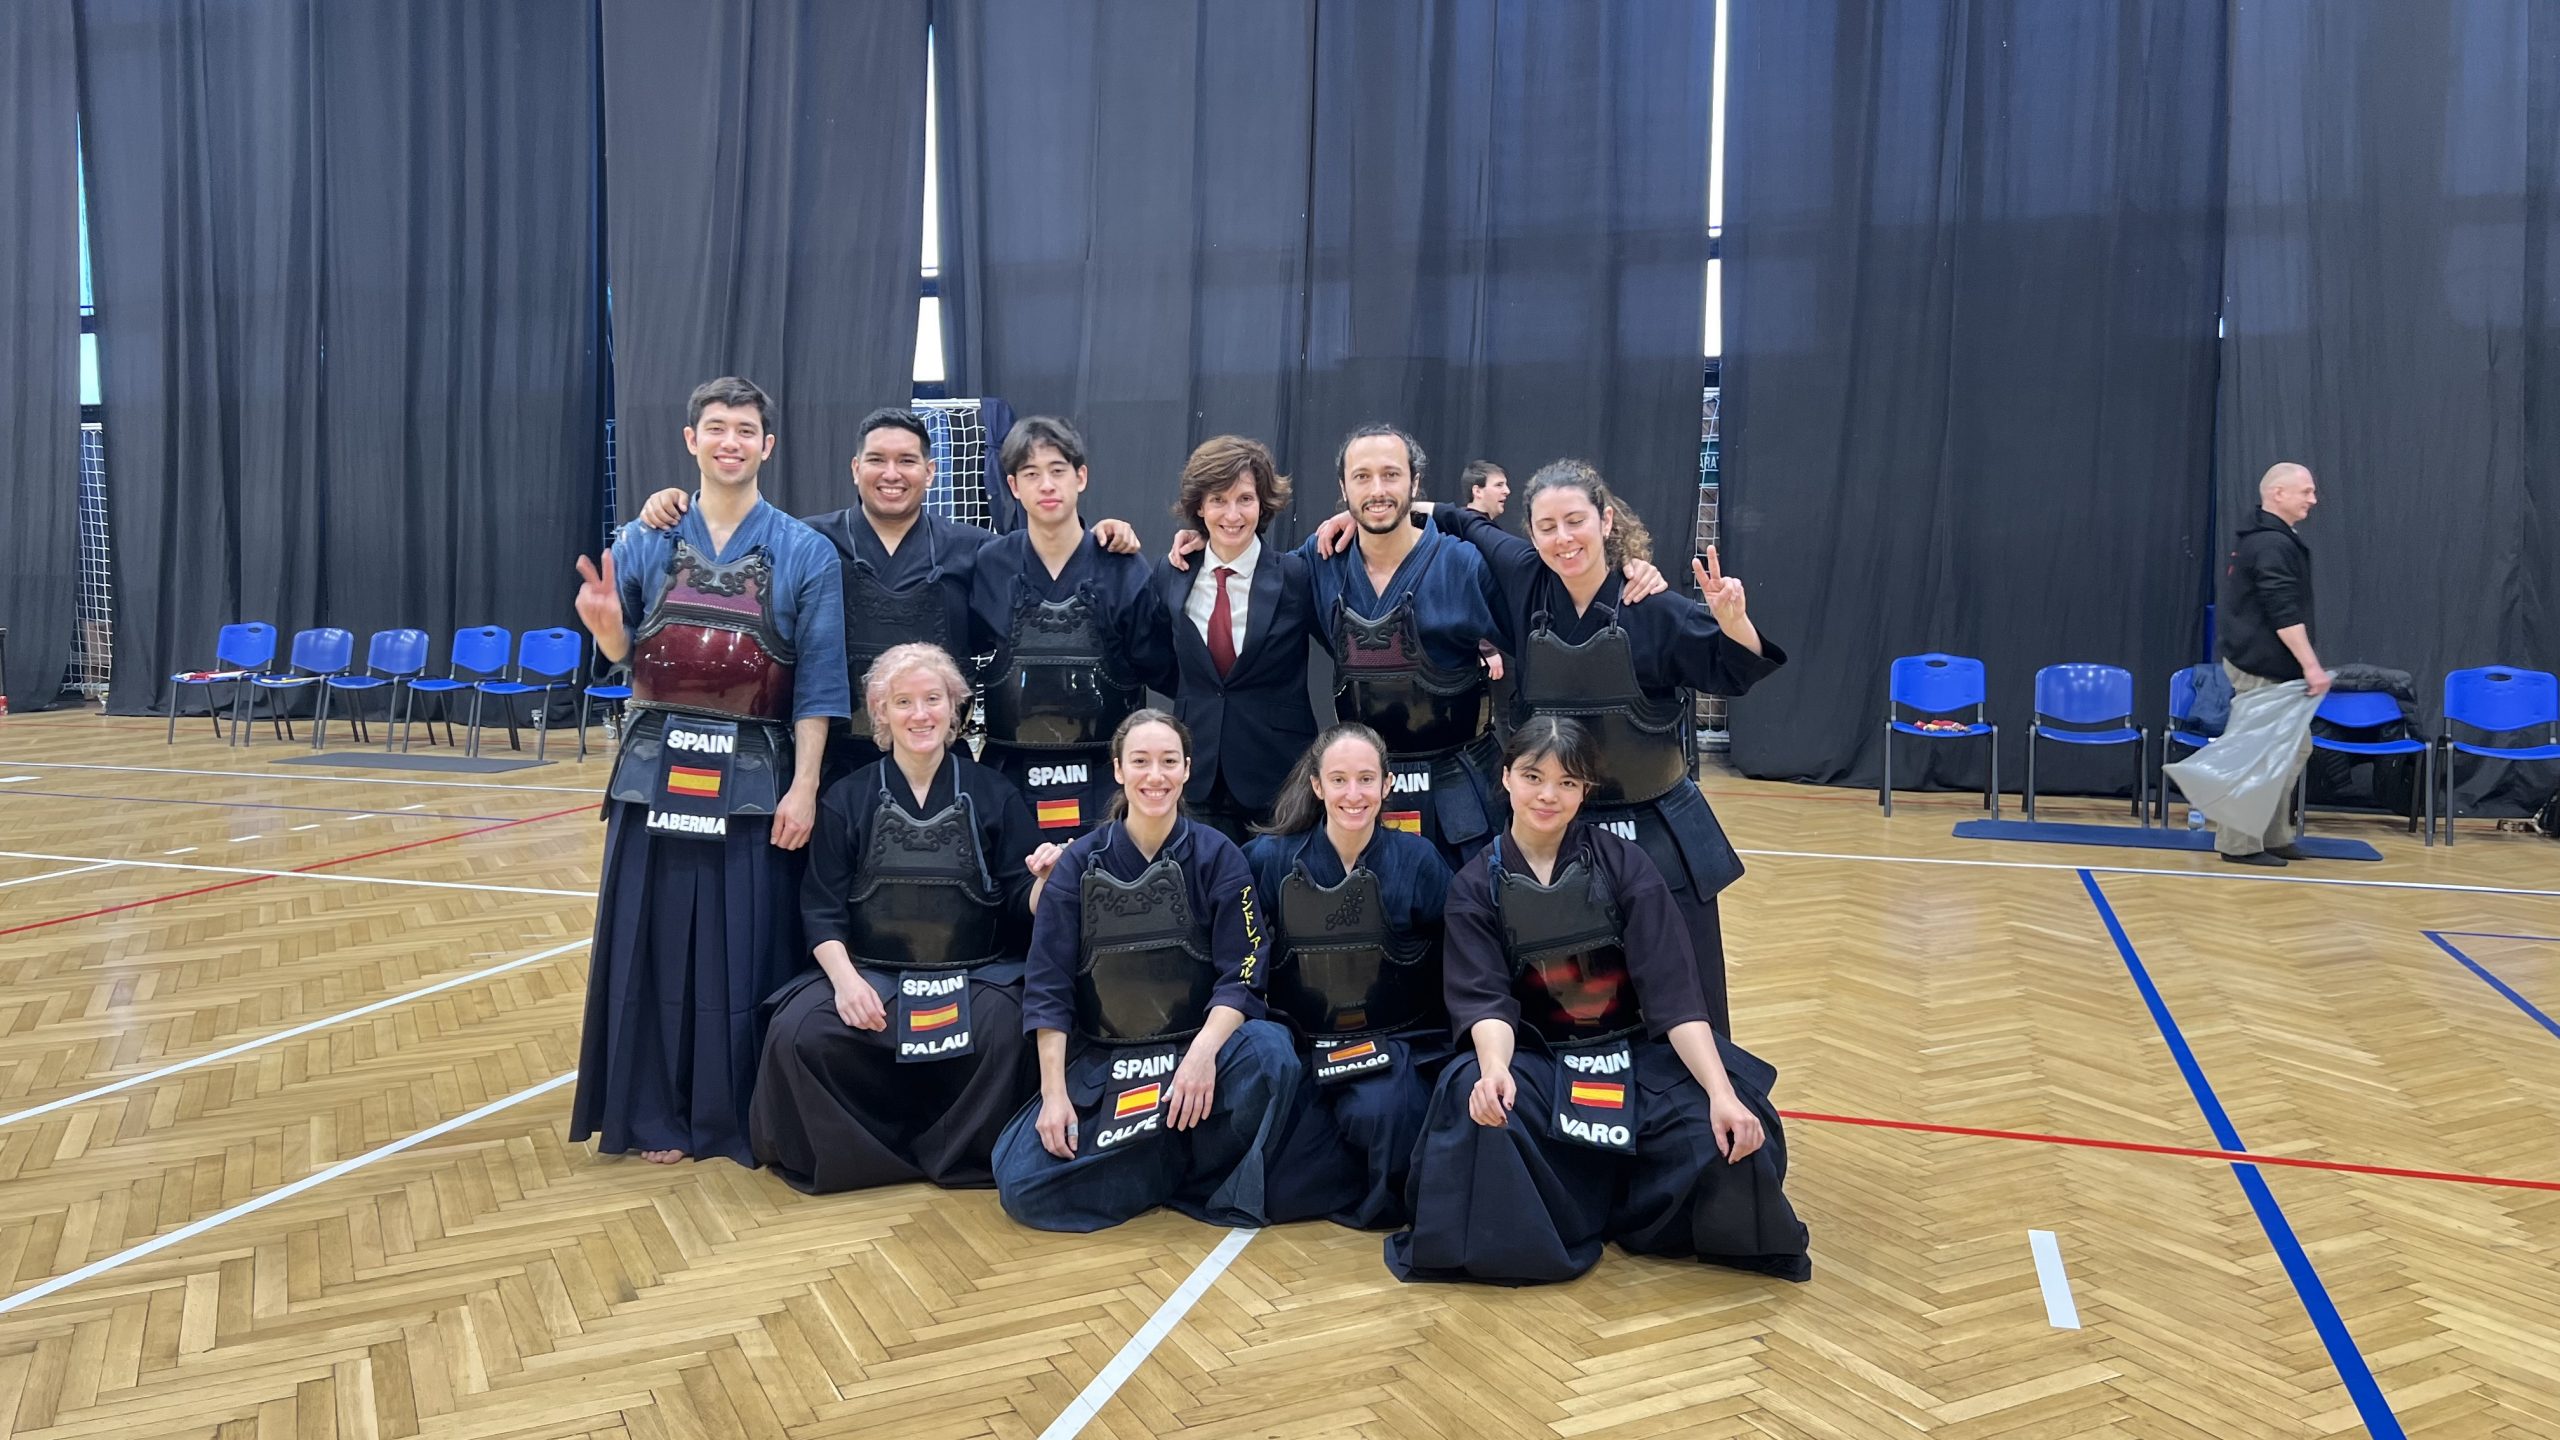 You are currently viewing Recap of the 9th National Kendo Teams Gathering in Budapest